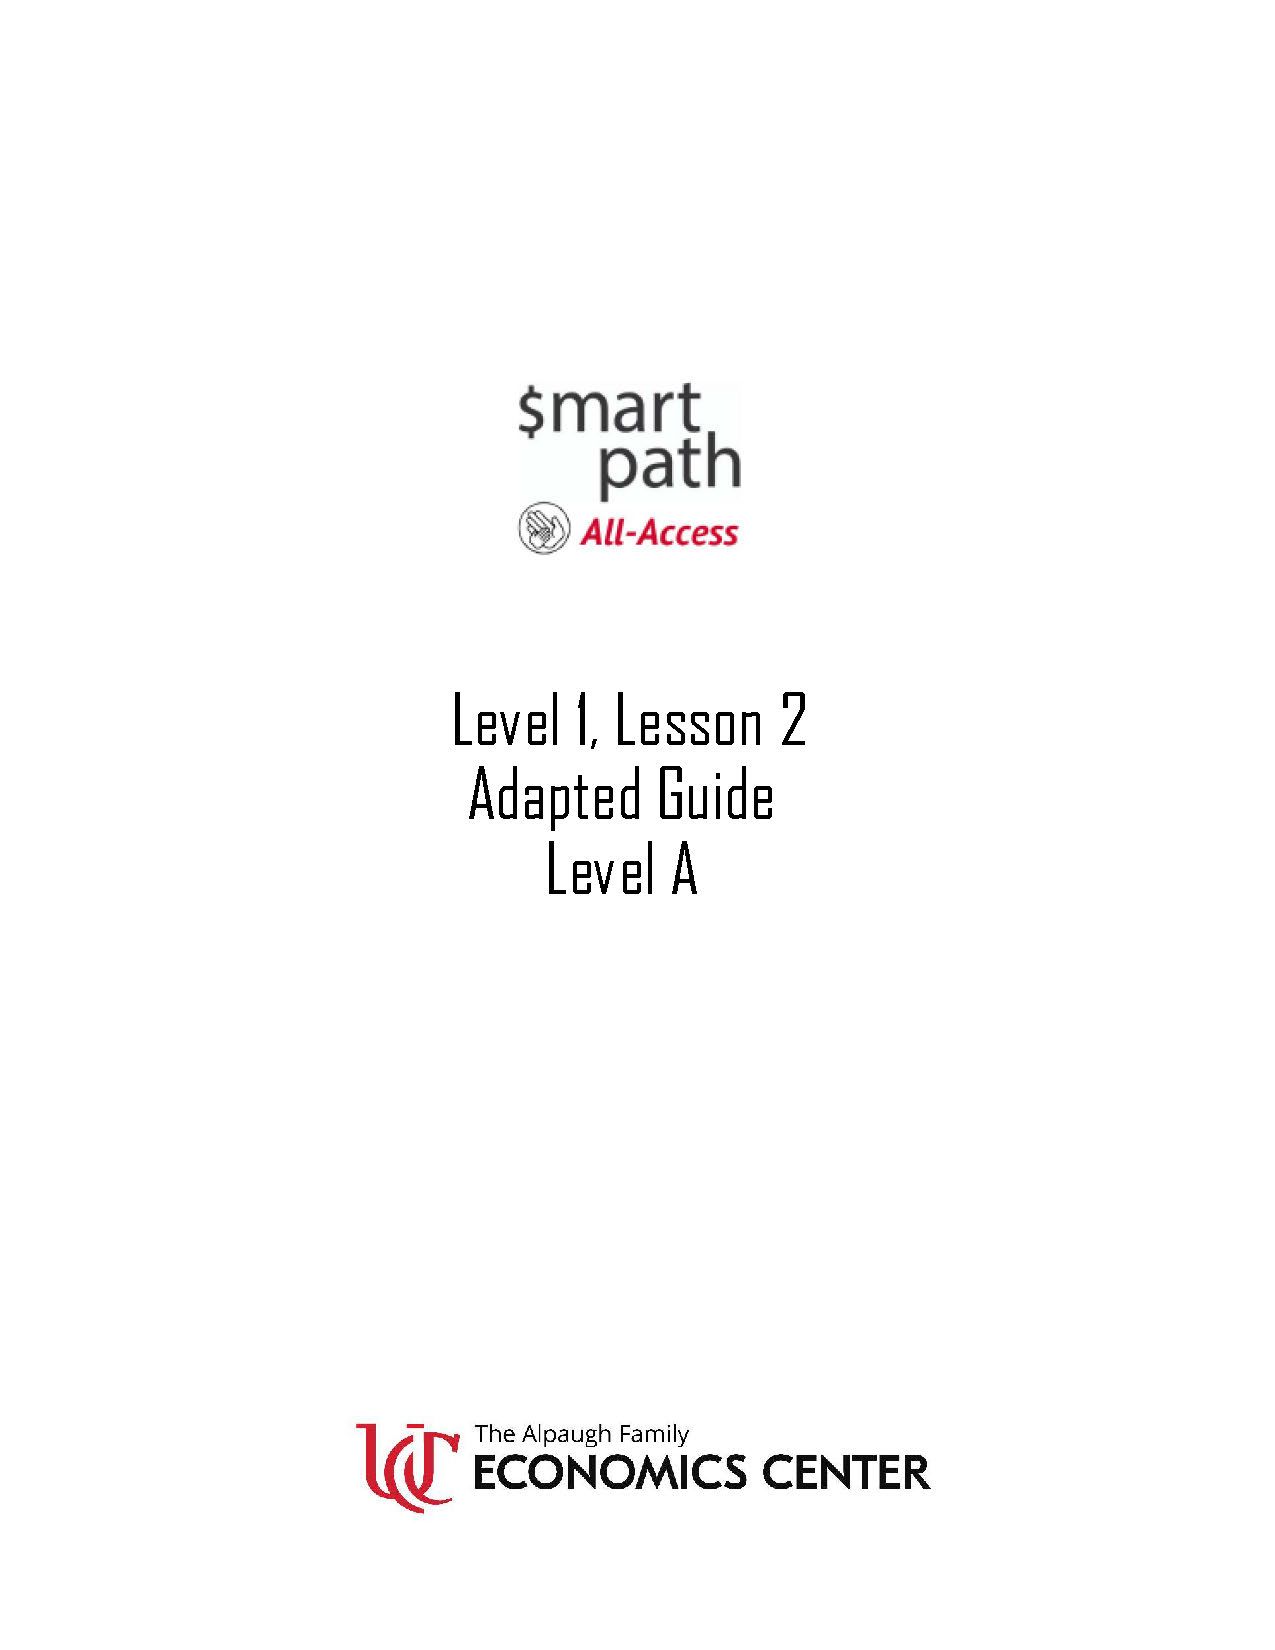 New Level 1 Lesson 2 Guide cover